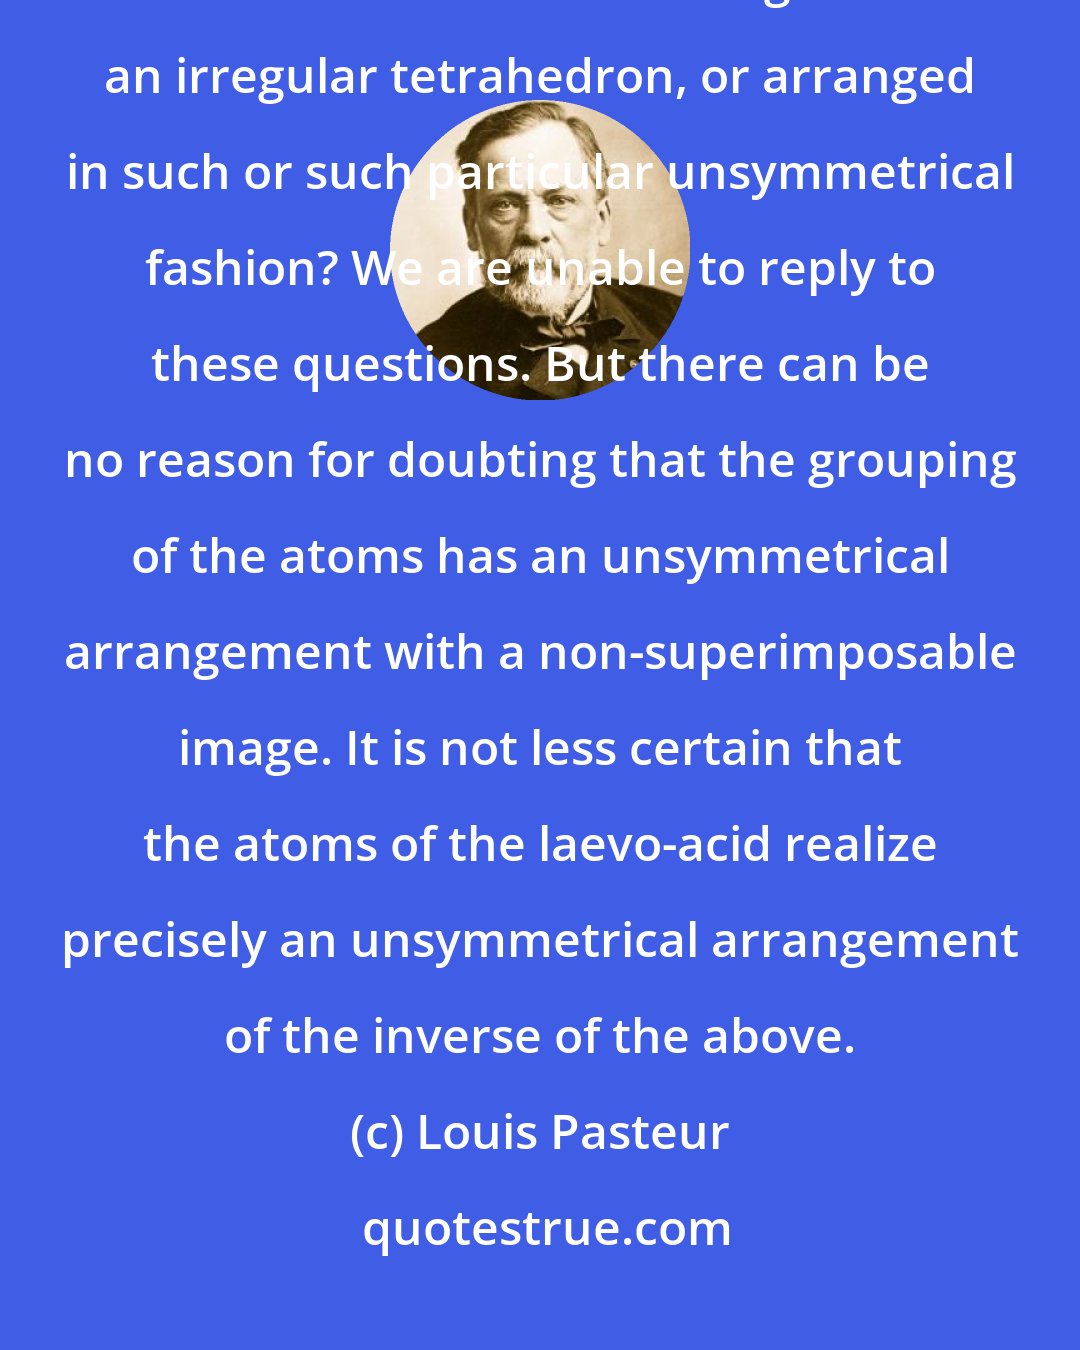 Louis Pasteur: Are the atoms of the dextroacid (tartaric) grouped in the spirals of a right-hand helix or situated at the angles of an irregular tetrahedron, or arranged in such or such particular unsymmetrical fashion? We are unable to reply to these questions. But there can be no reason for doubting that the grouping of the atoms has an unsymmetrical arrangement with a non-superimposable image. It is not less certain that the atoms of the laevo-acid realize precisely an unsymmetrical arrangement of the inverse of the above.